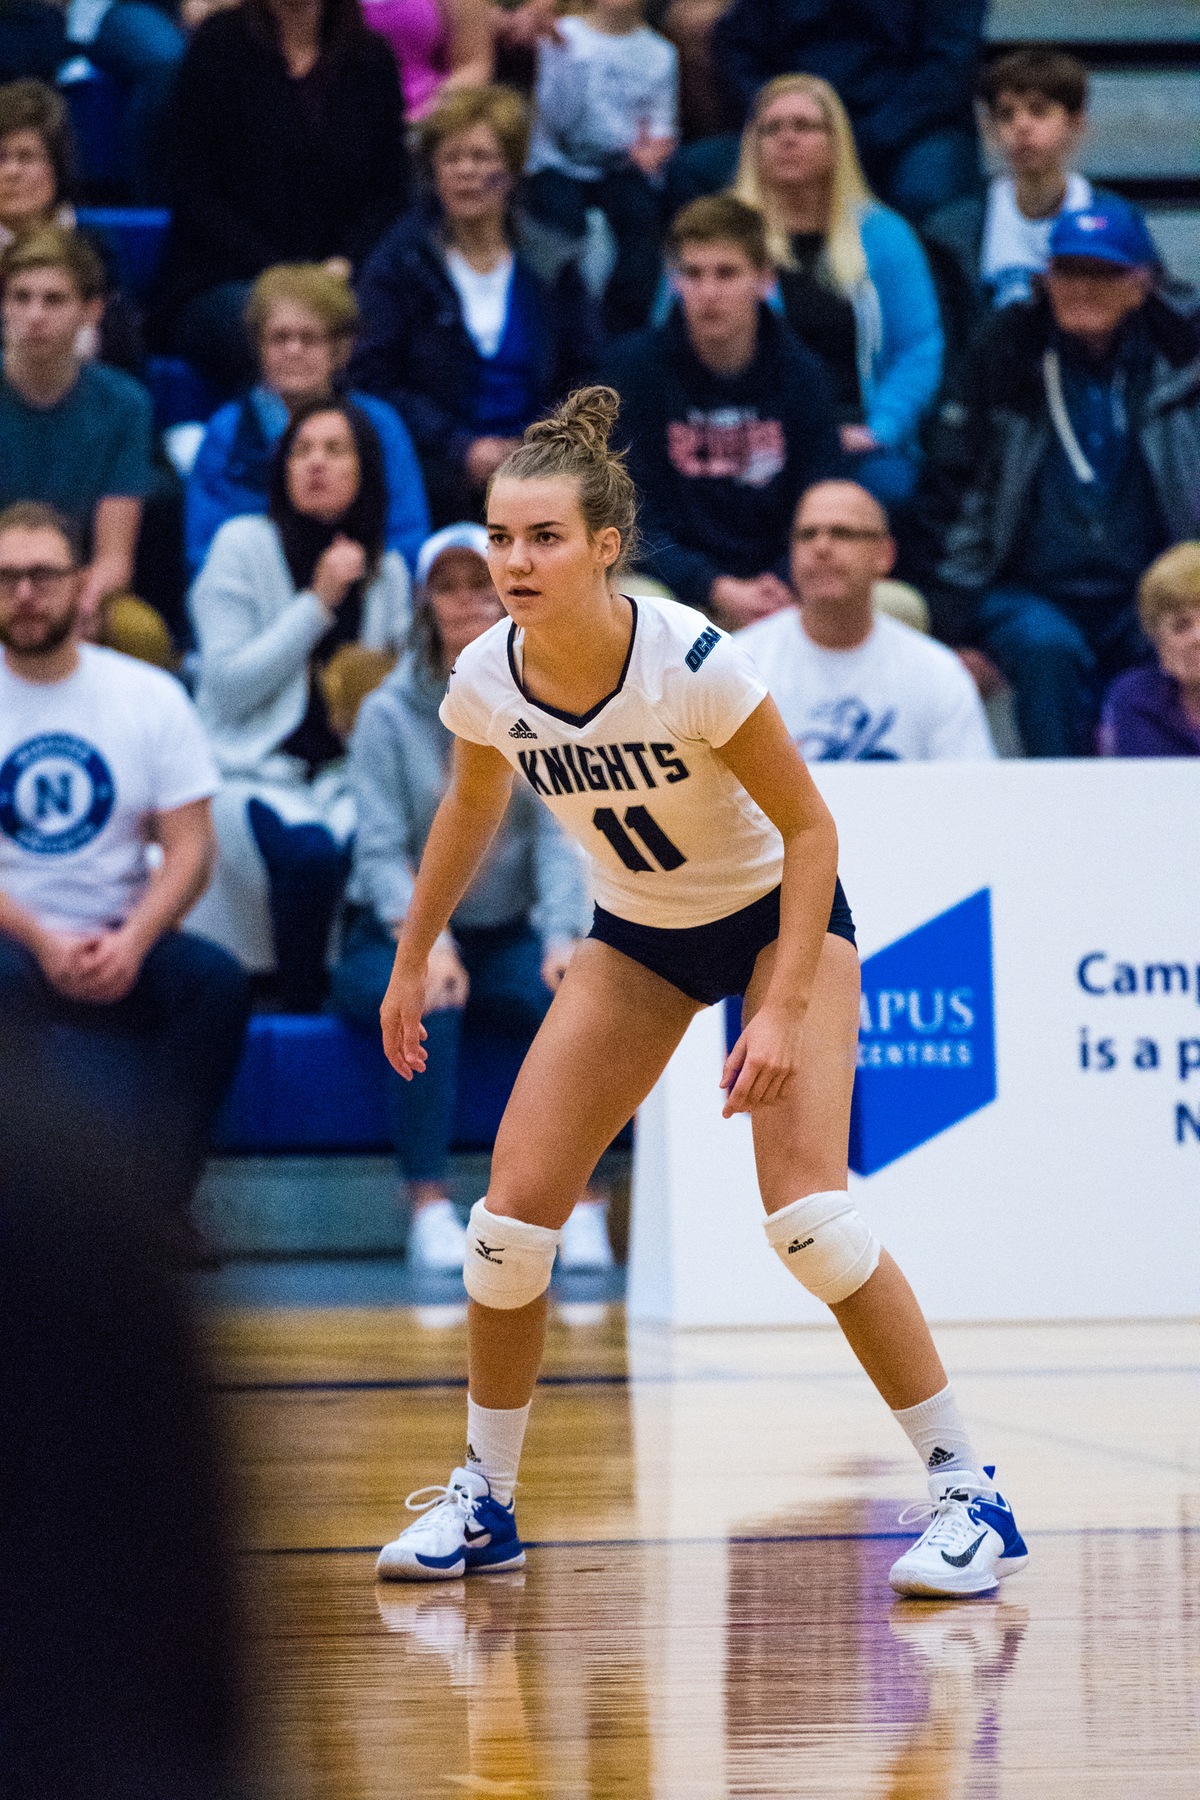 RECAP: Knights improve to 3-1 with straight set victory over Conestoga